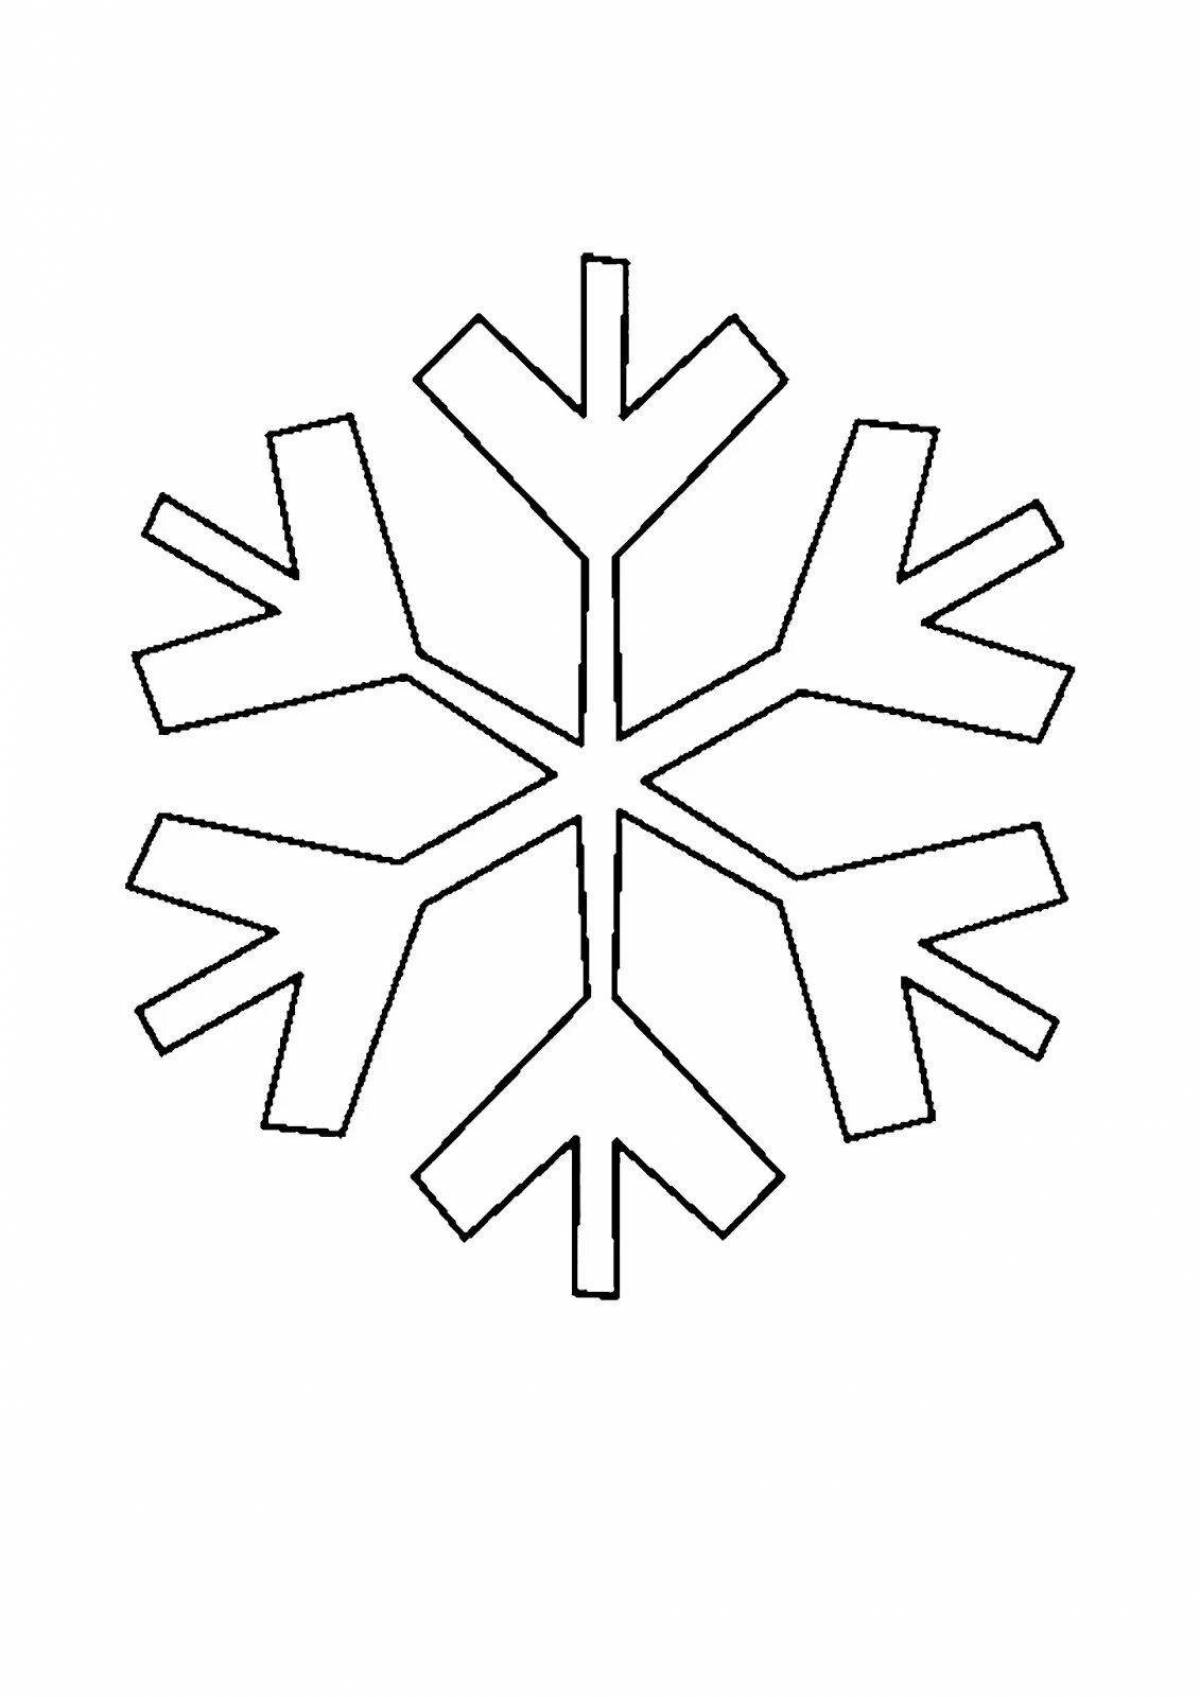 Colorful snowflake coloring book for children 4-5 years old in kindergarten